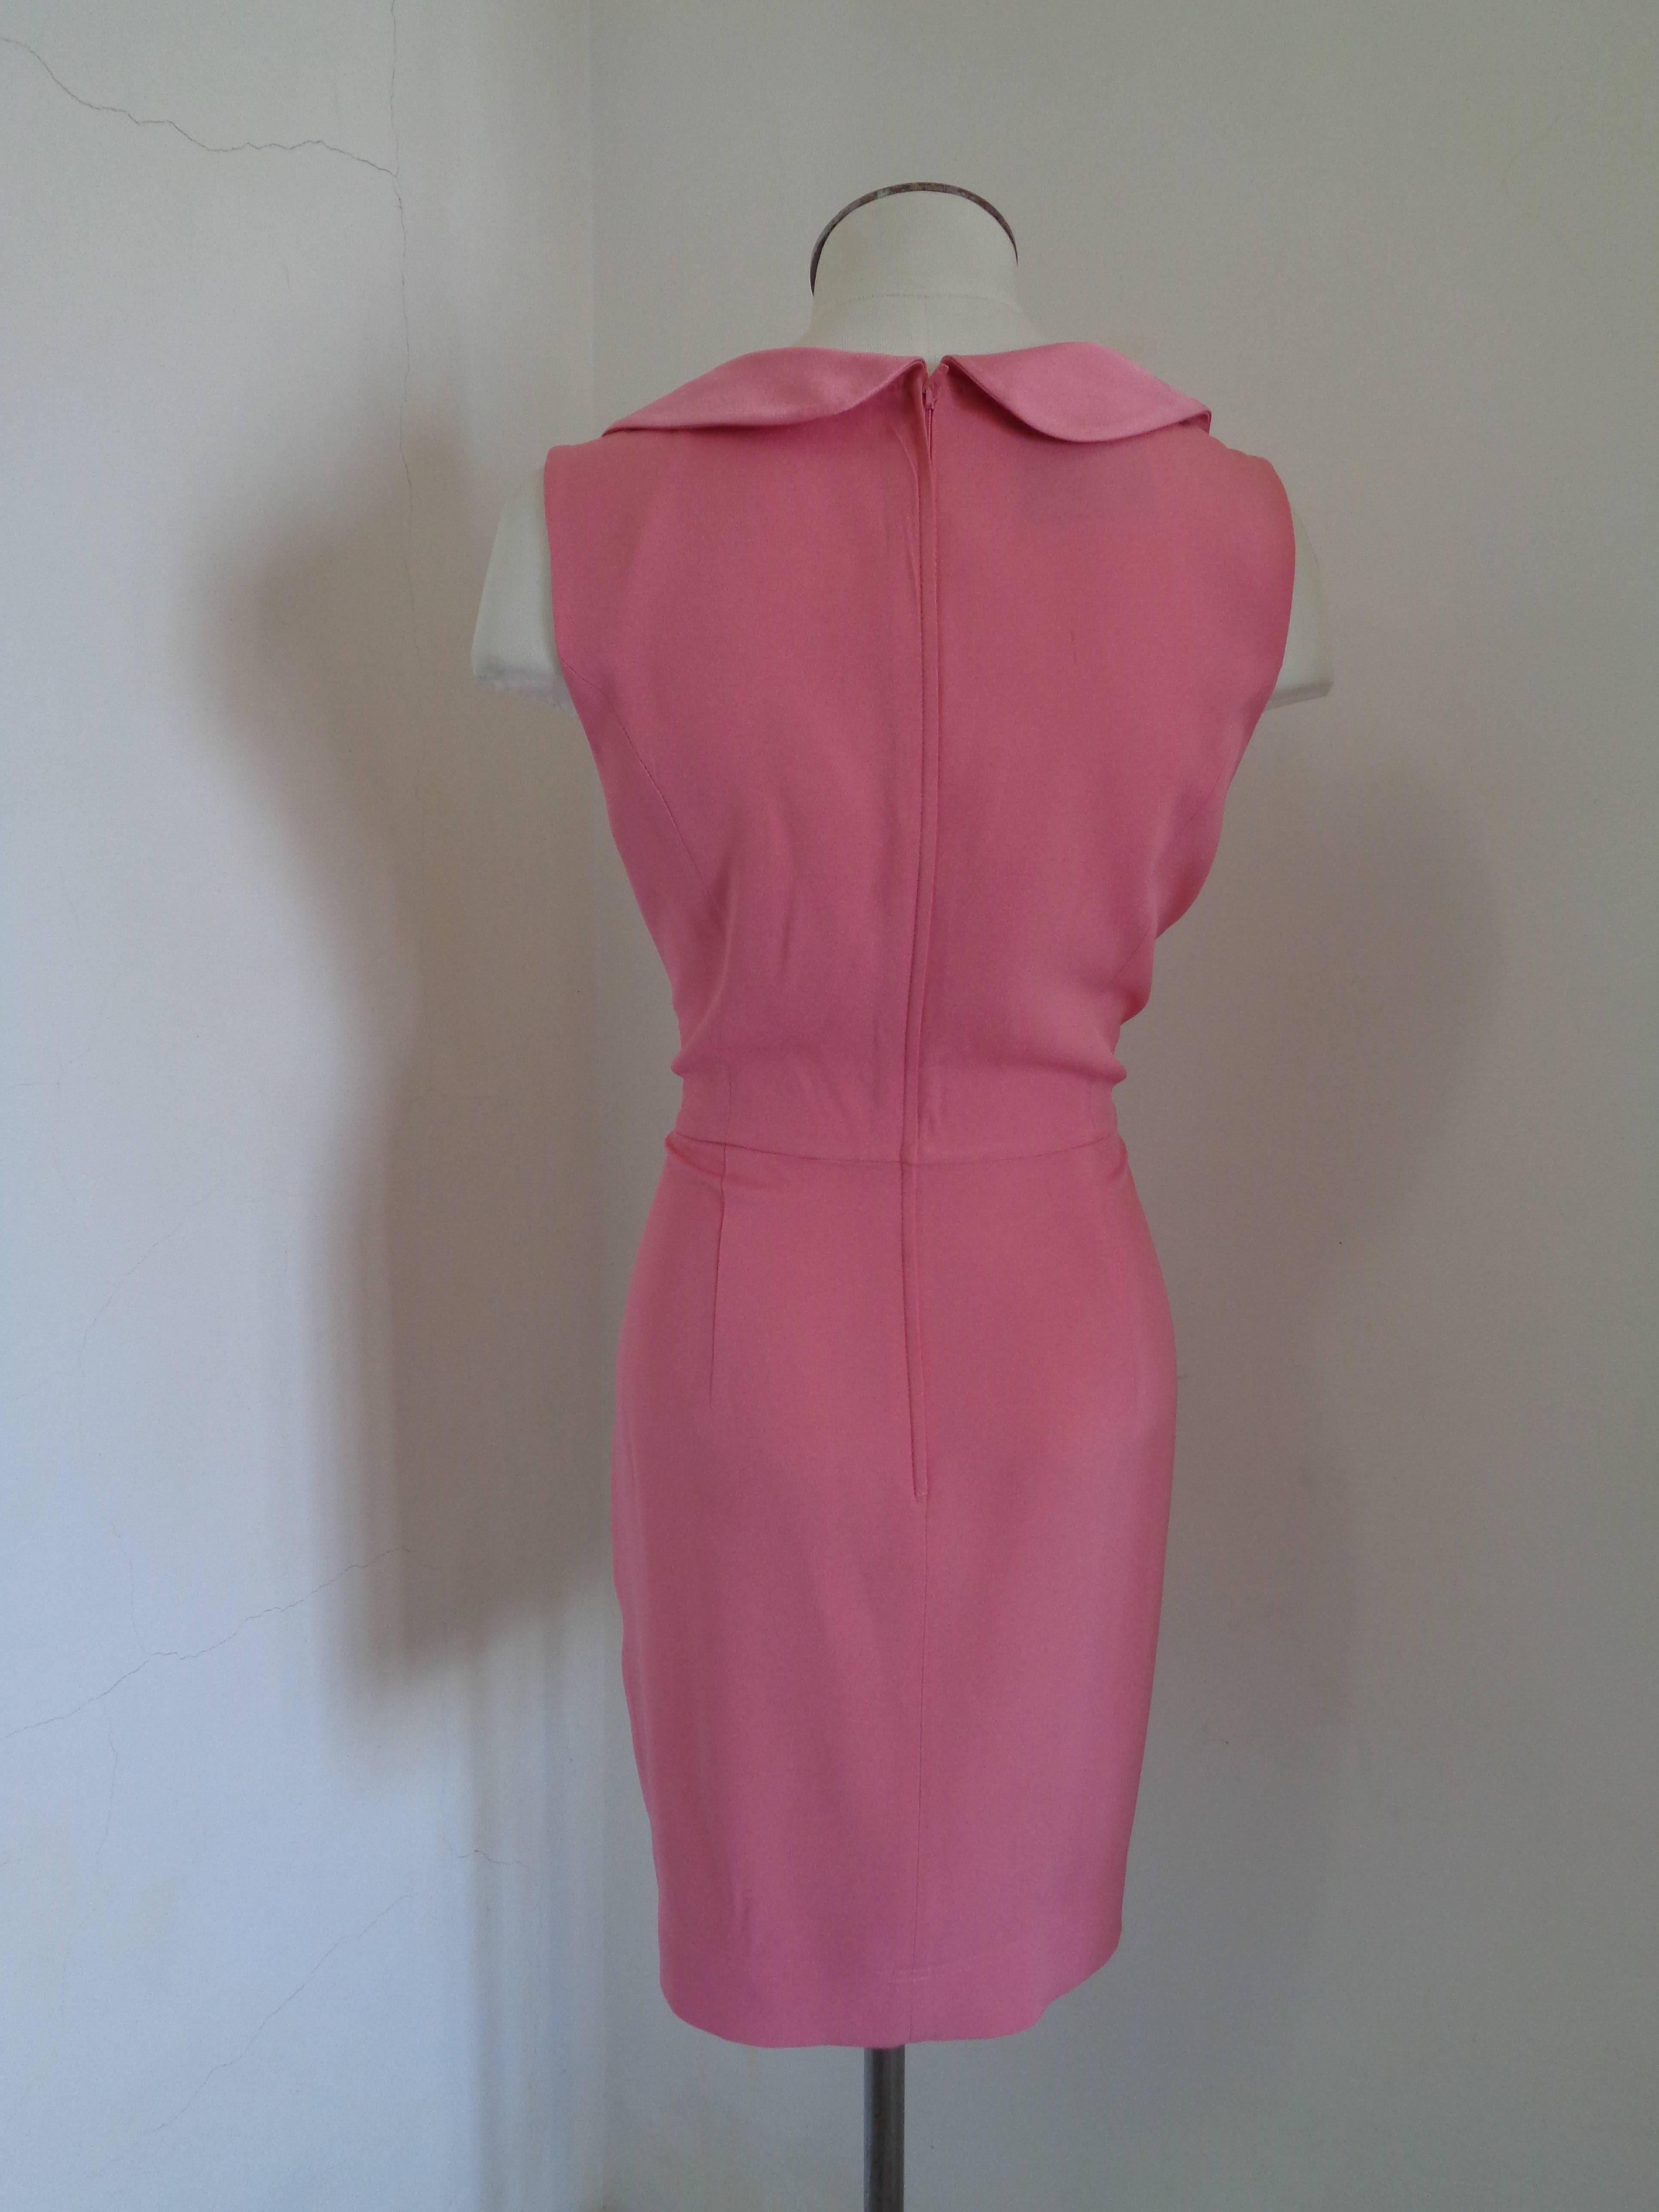 Moschino Cheap & Chic Pink Dress In Excellent Condition In Capri, IT